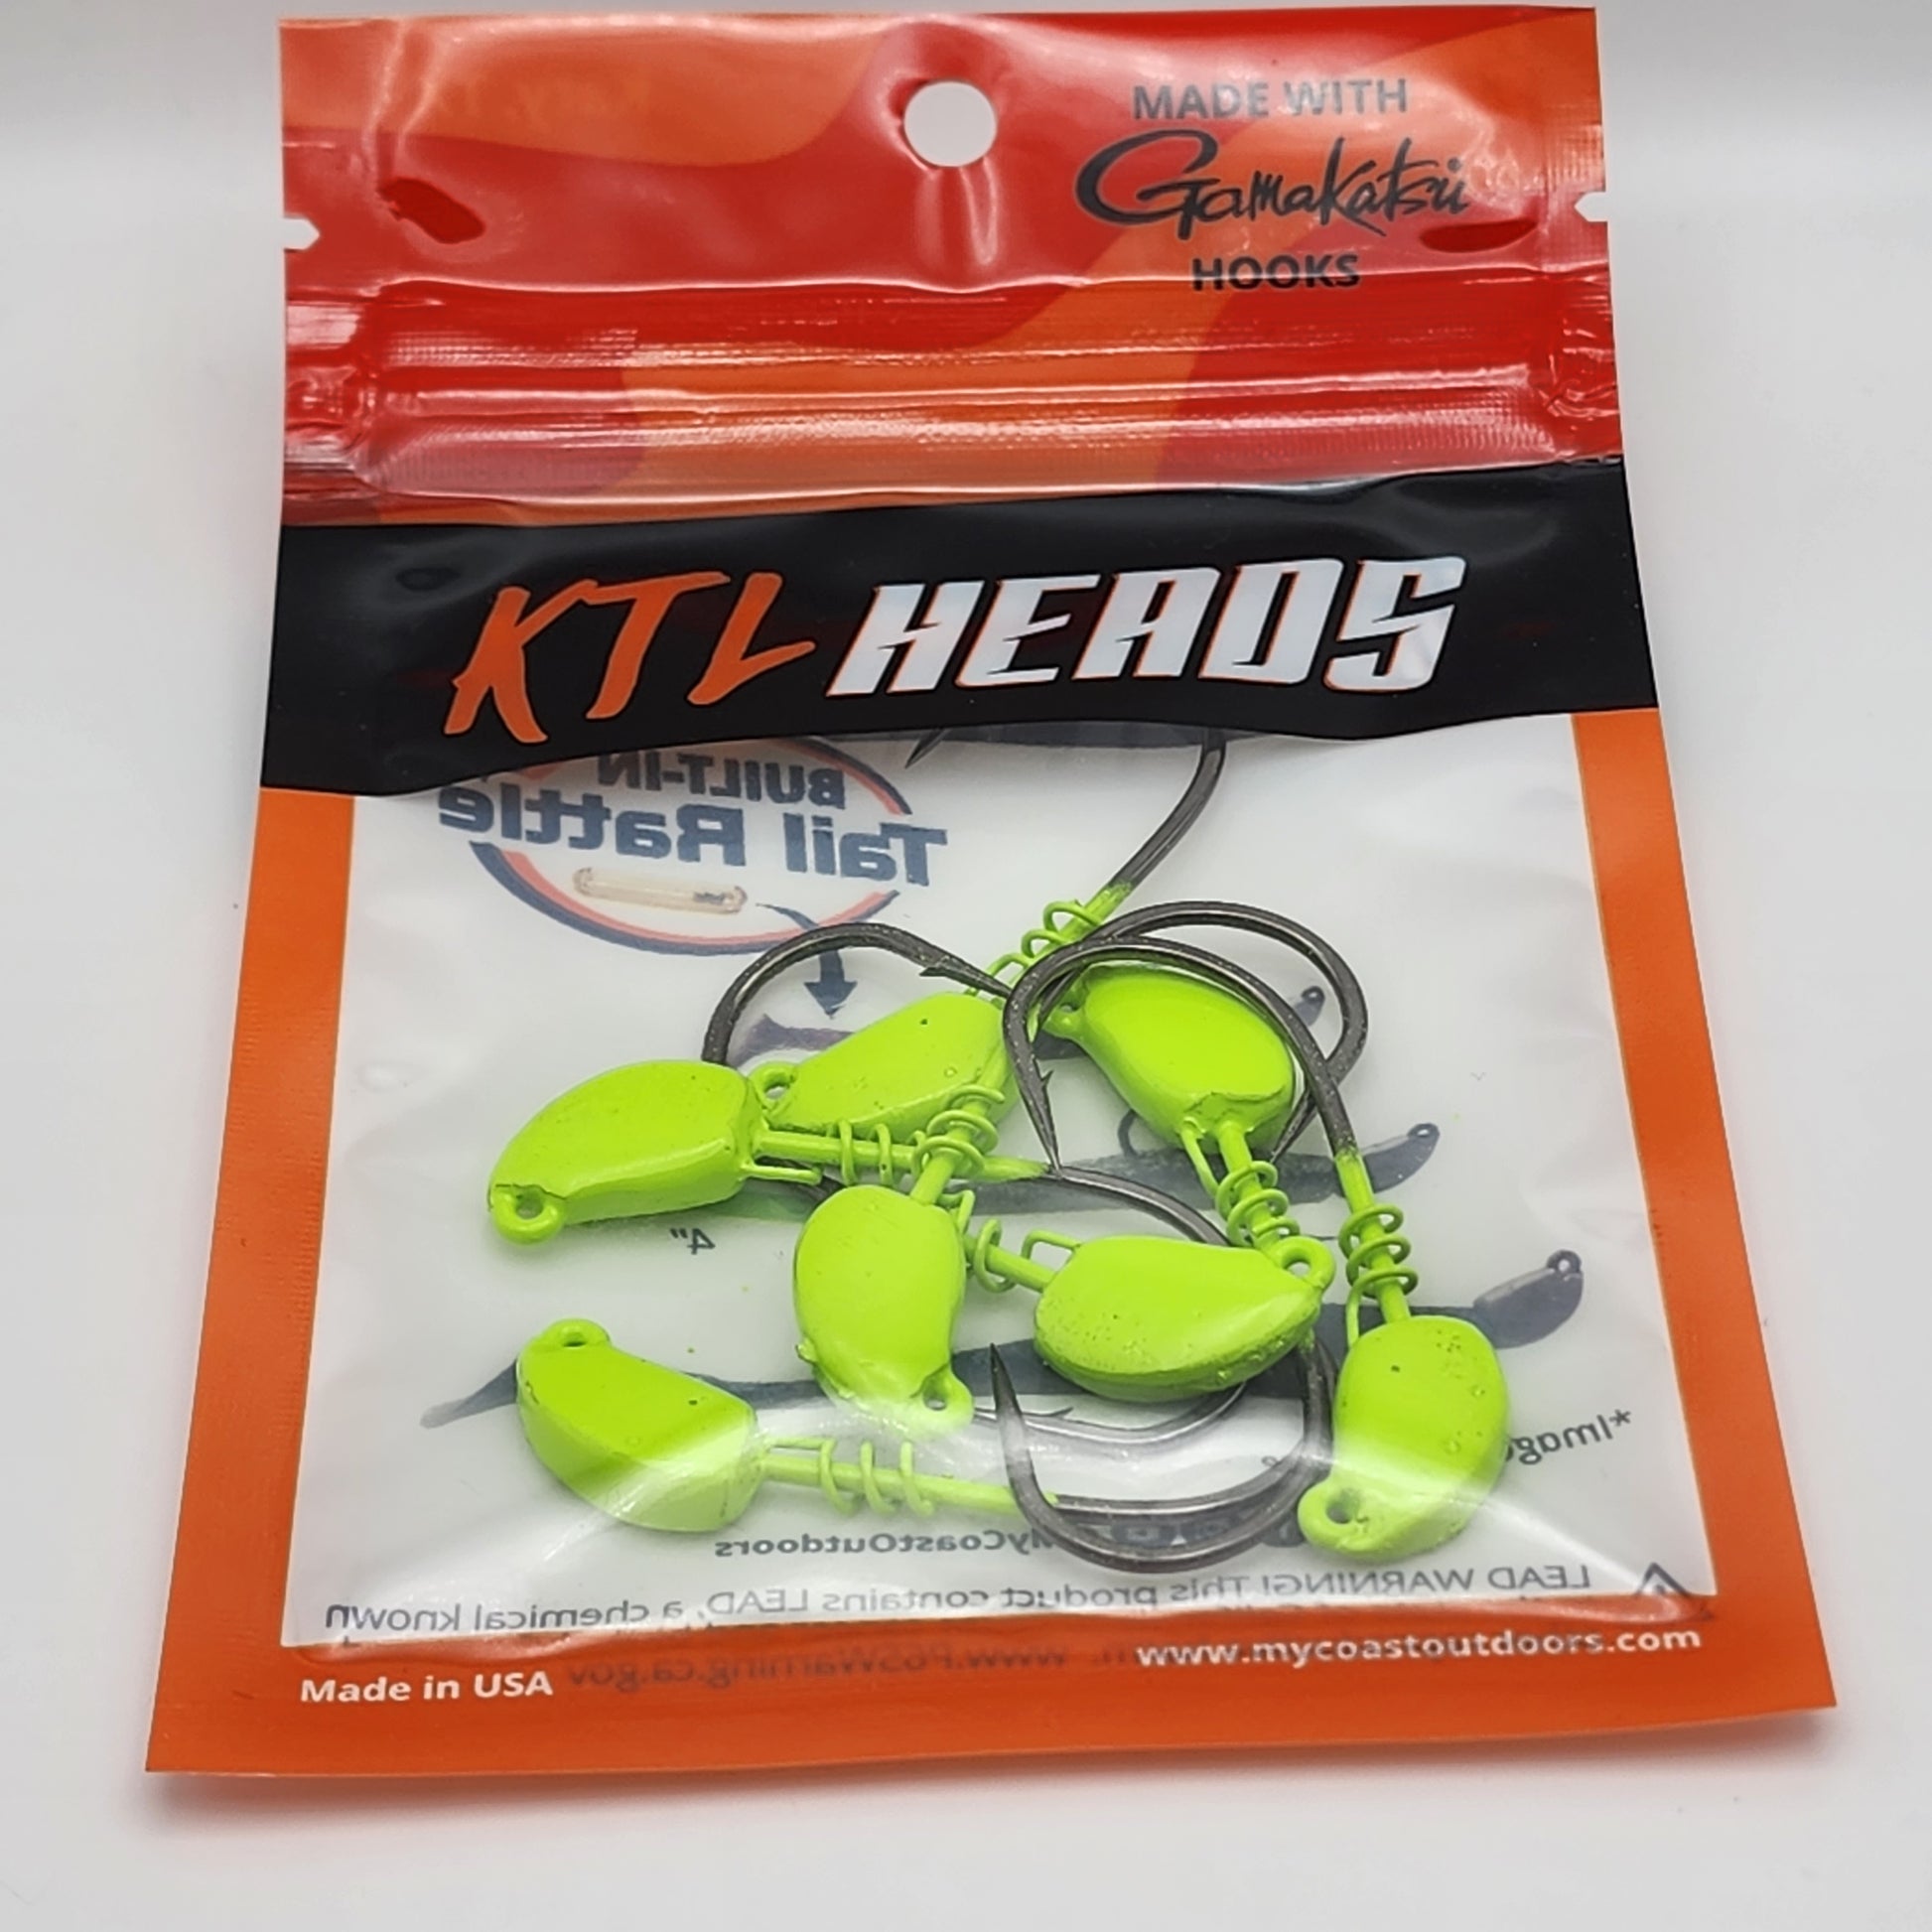 KTL 7 Pieces Jighead Per Pack, Gamakatsu hooks – Knockin Tail Lures by My  Coast Outdoors Inc.